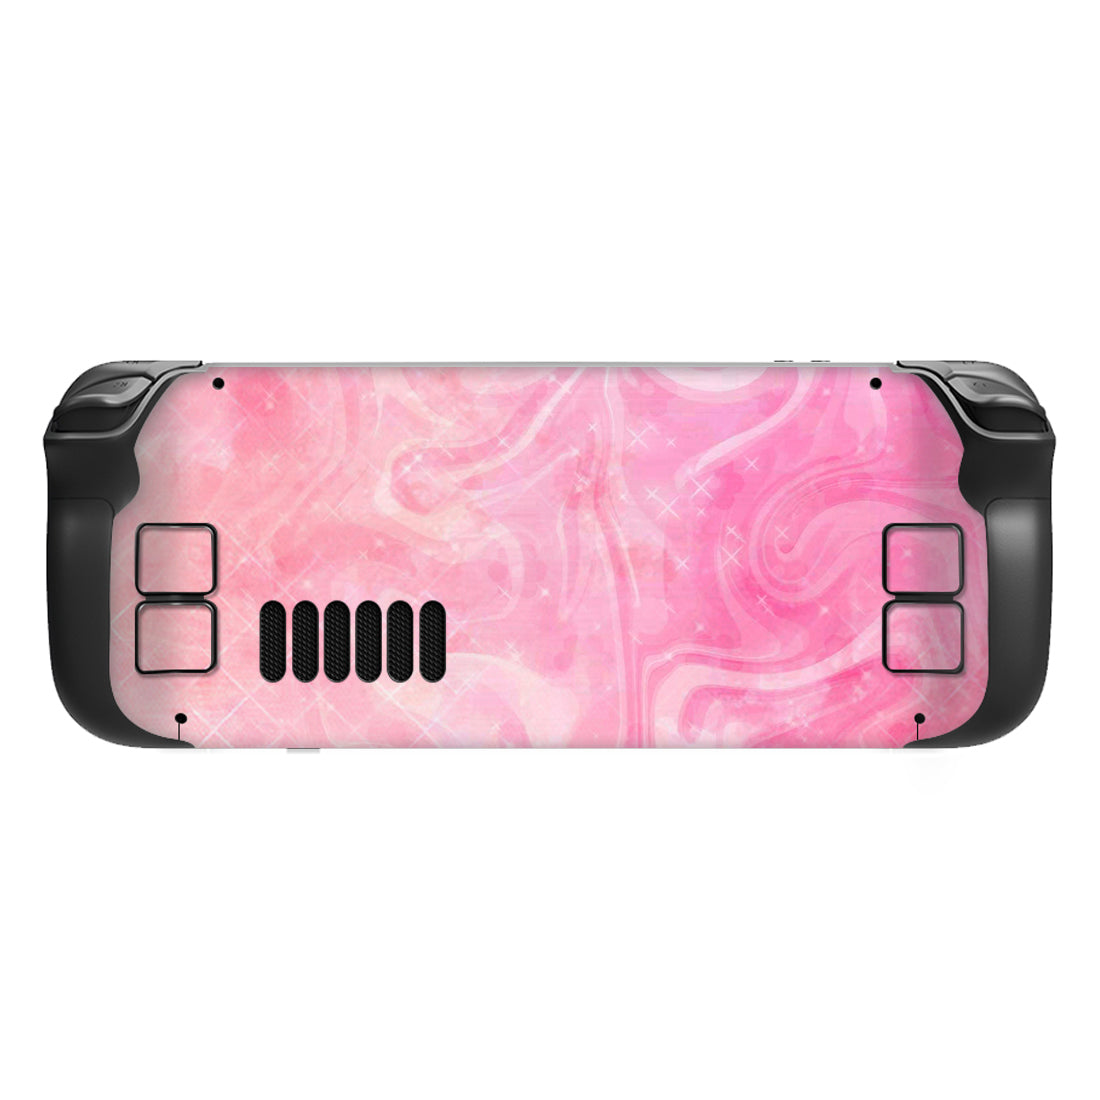 PlayVital Full Set Protective Skin Decal for Steam Deck, Custom Stickers Vinyl Cover for Steam Deck Handheld Gaming PC - Psychedelic Pink - SDTM027 playvital